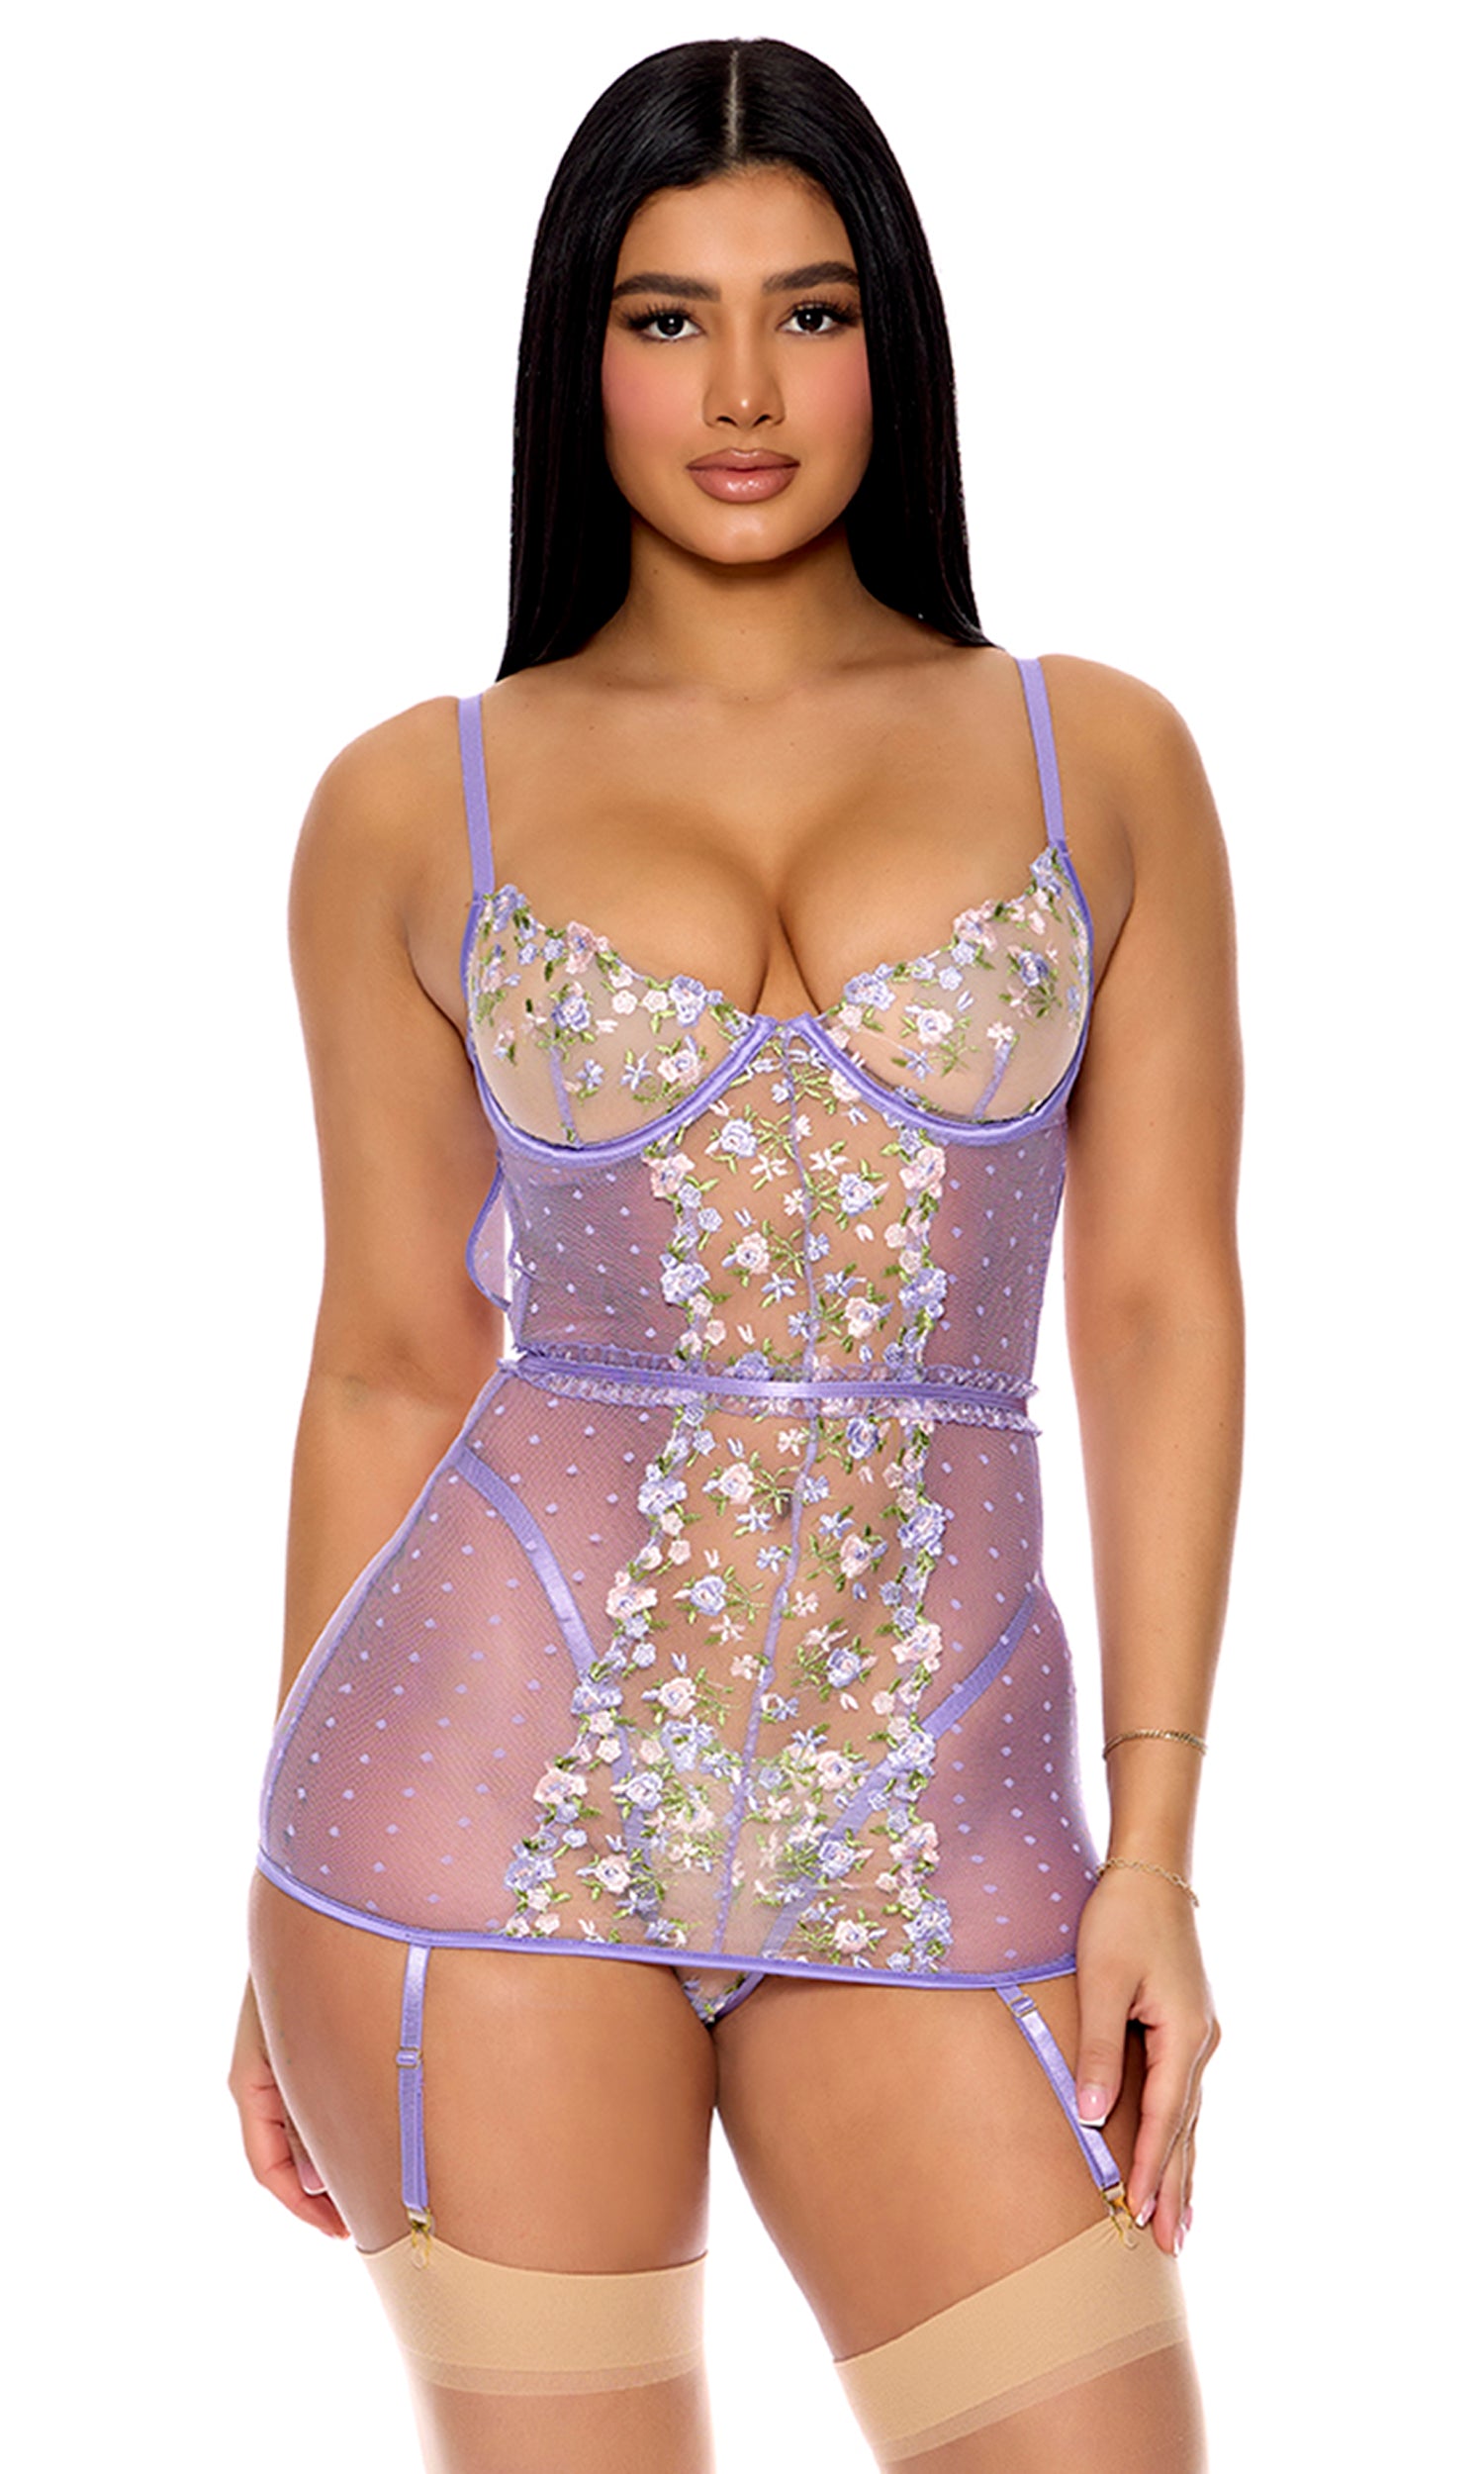 Bloom For You Embroidered Chemise Lingerie Set